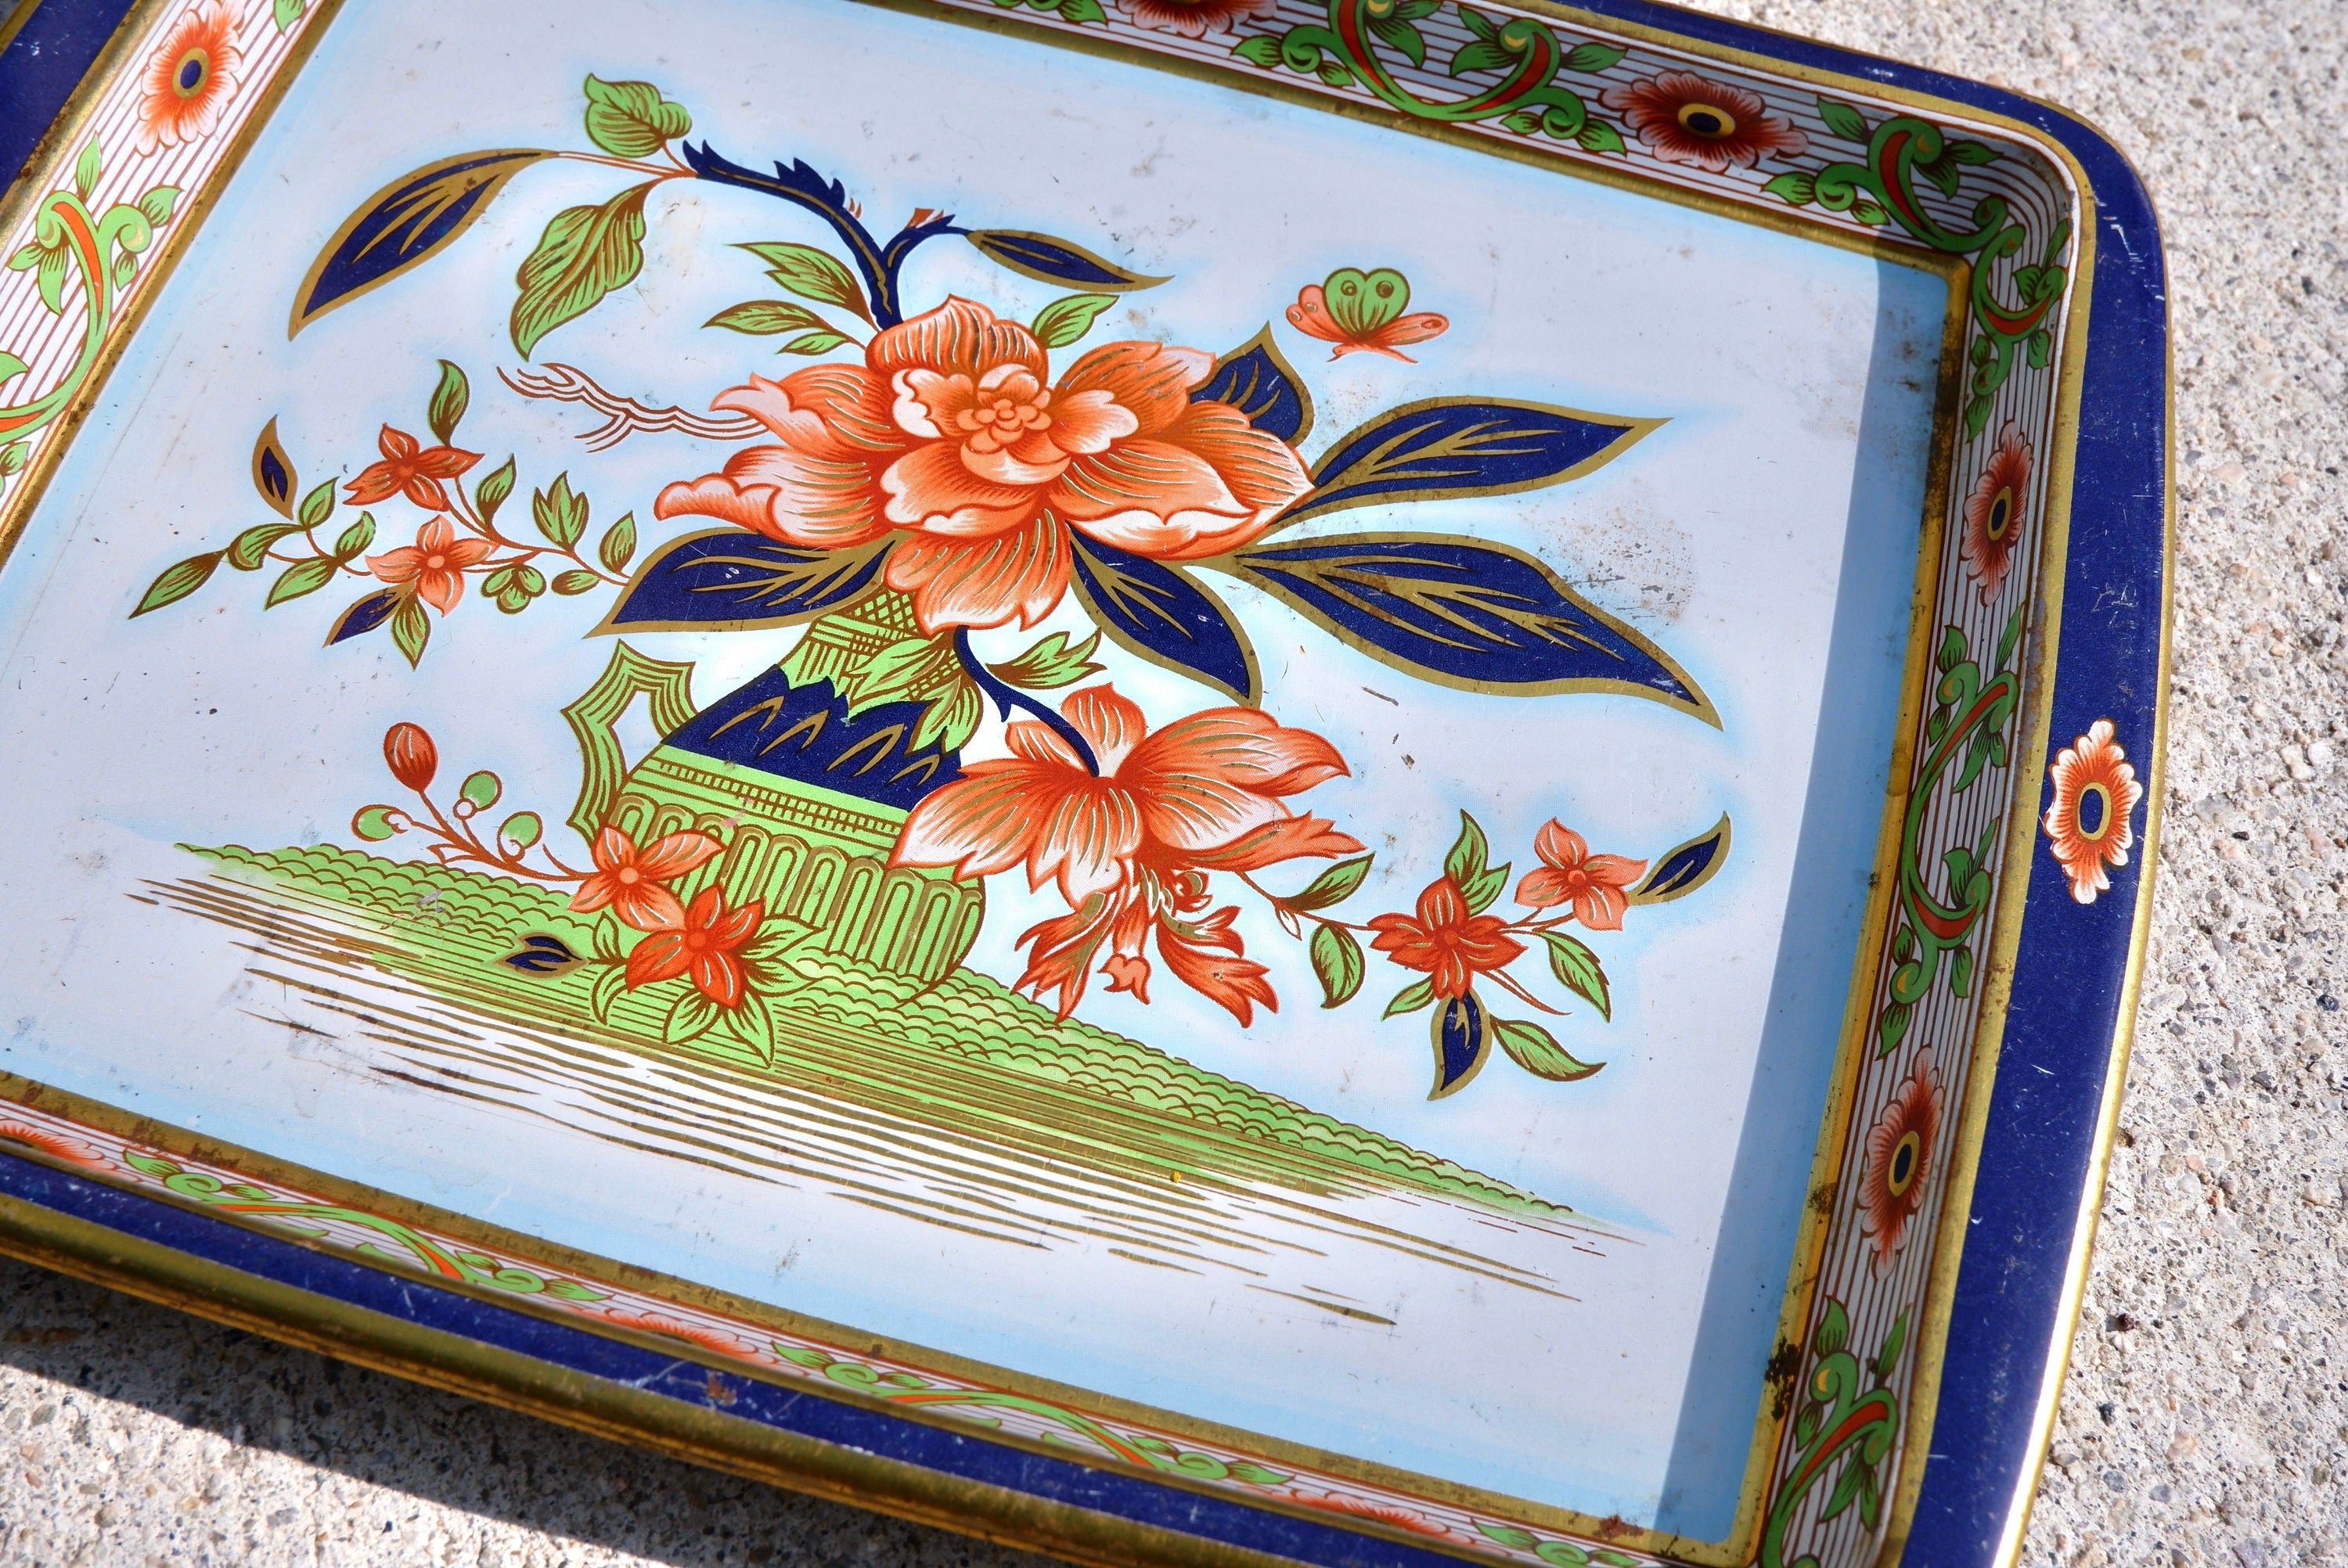 Vintage - Daher Decorated Ware Tin Tray (Made in England) 16